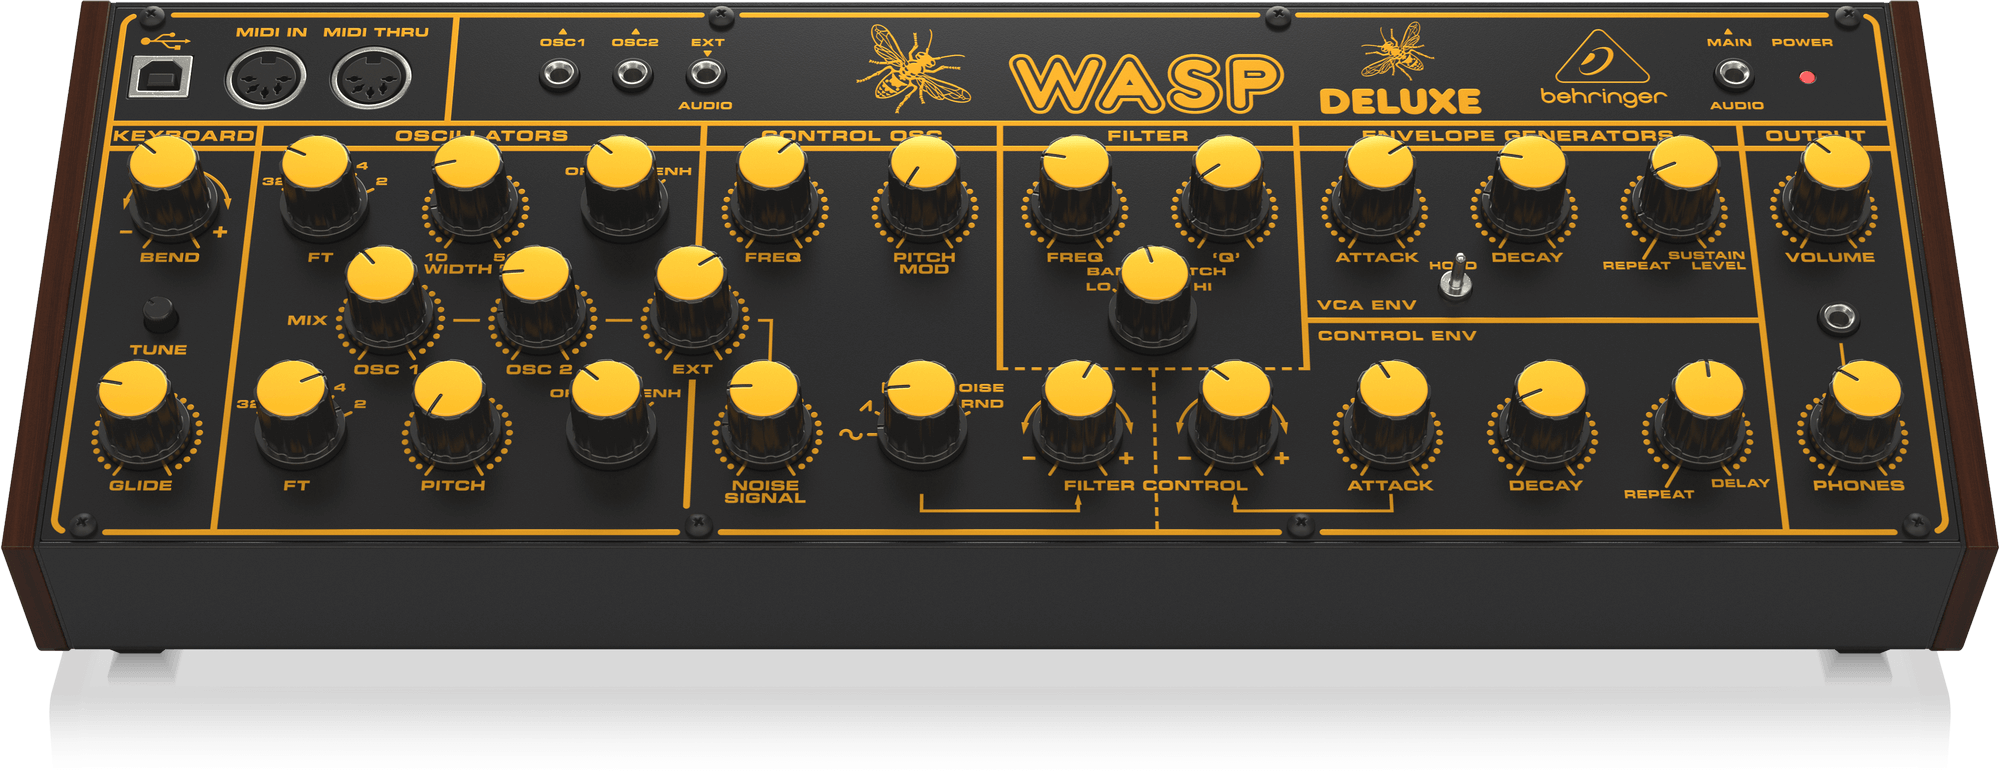 Behringer | Product | WASP DELUXE